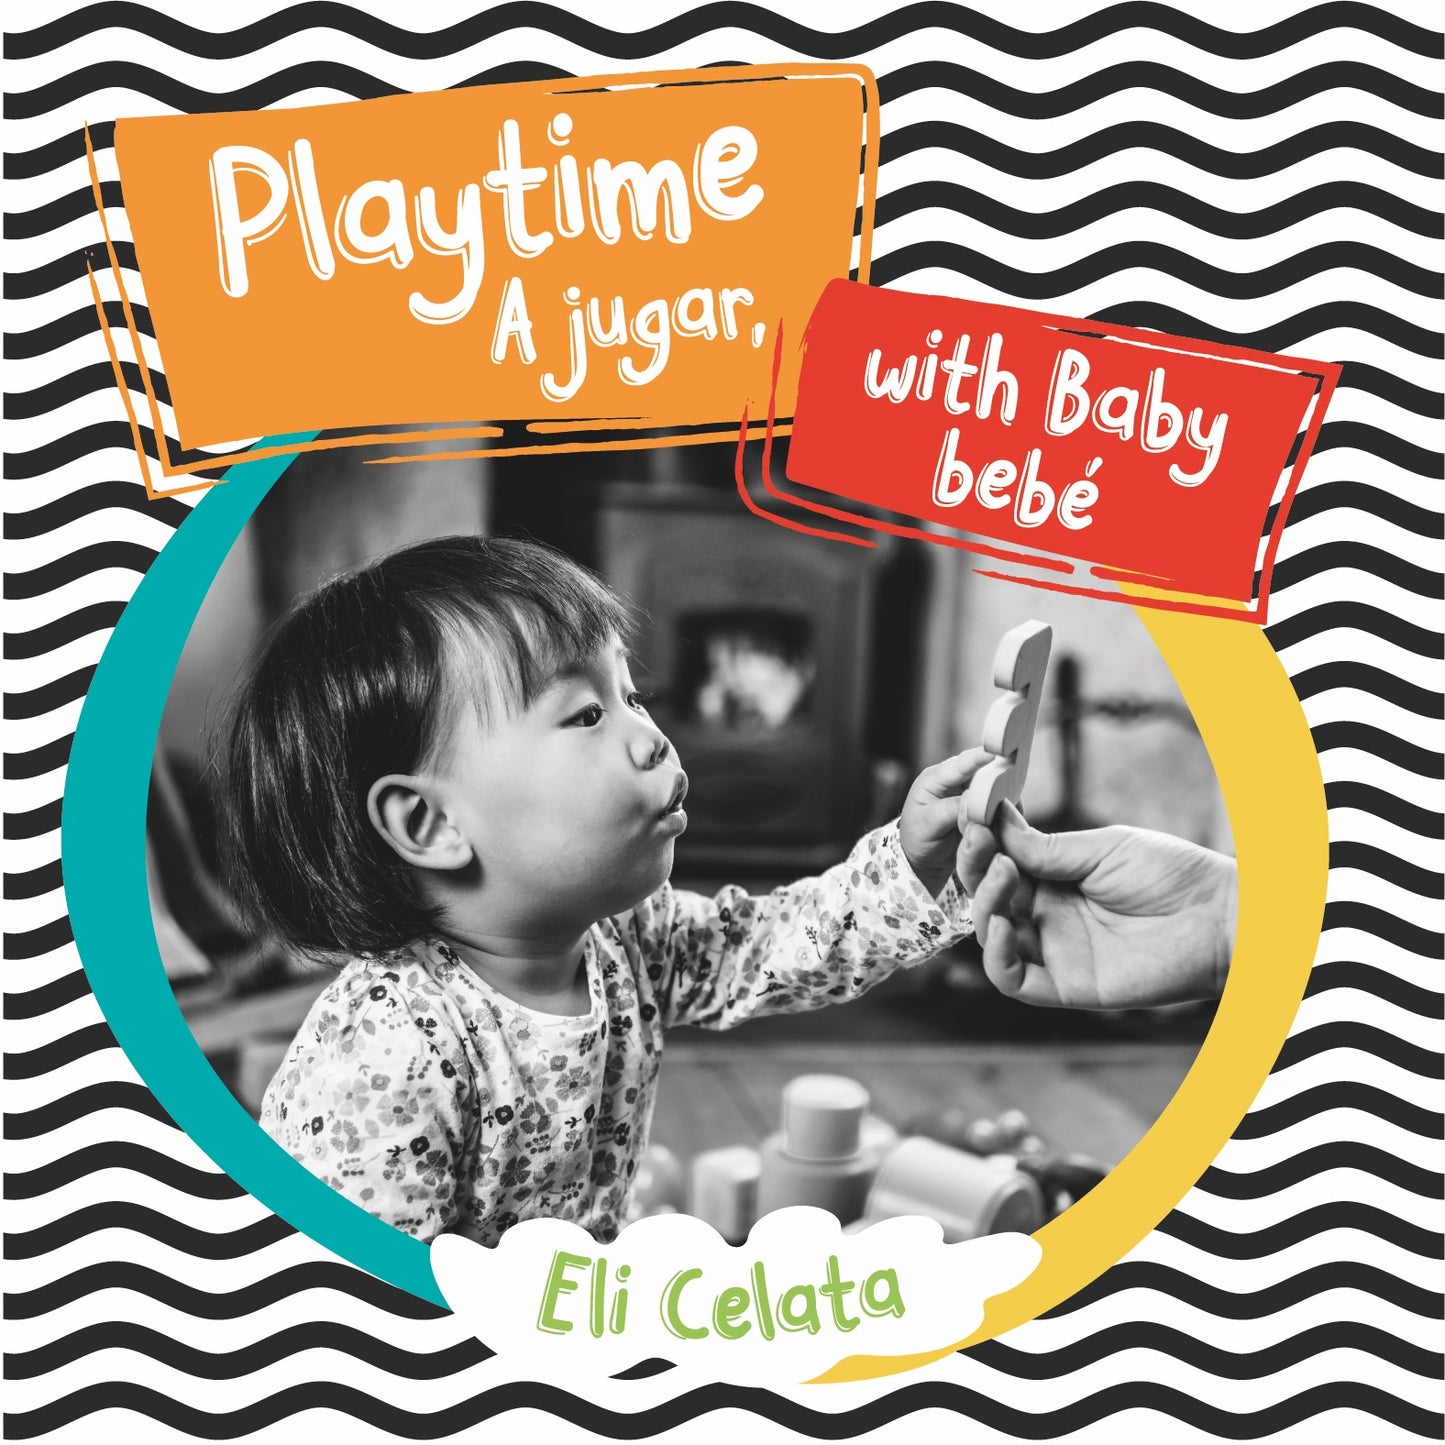 Playtime with Baby/A jugar, bebe